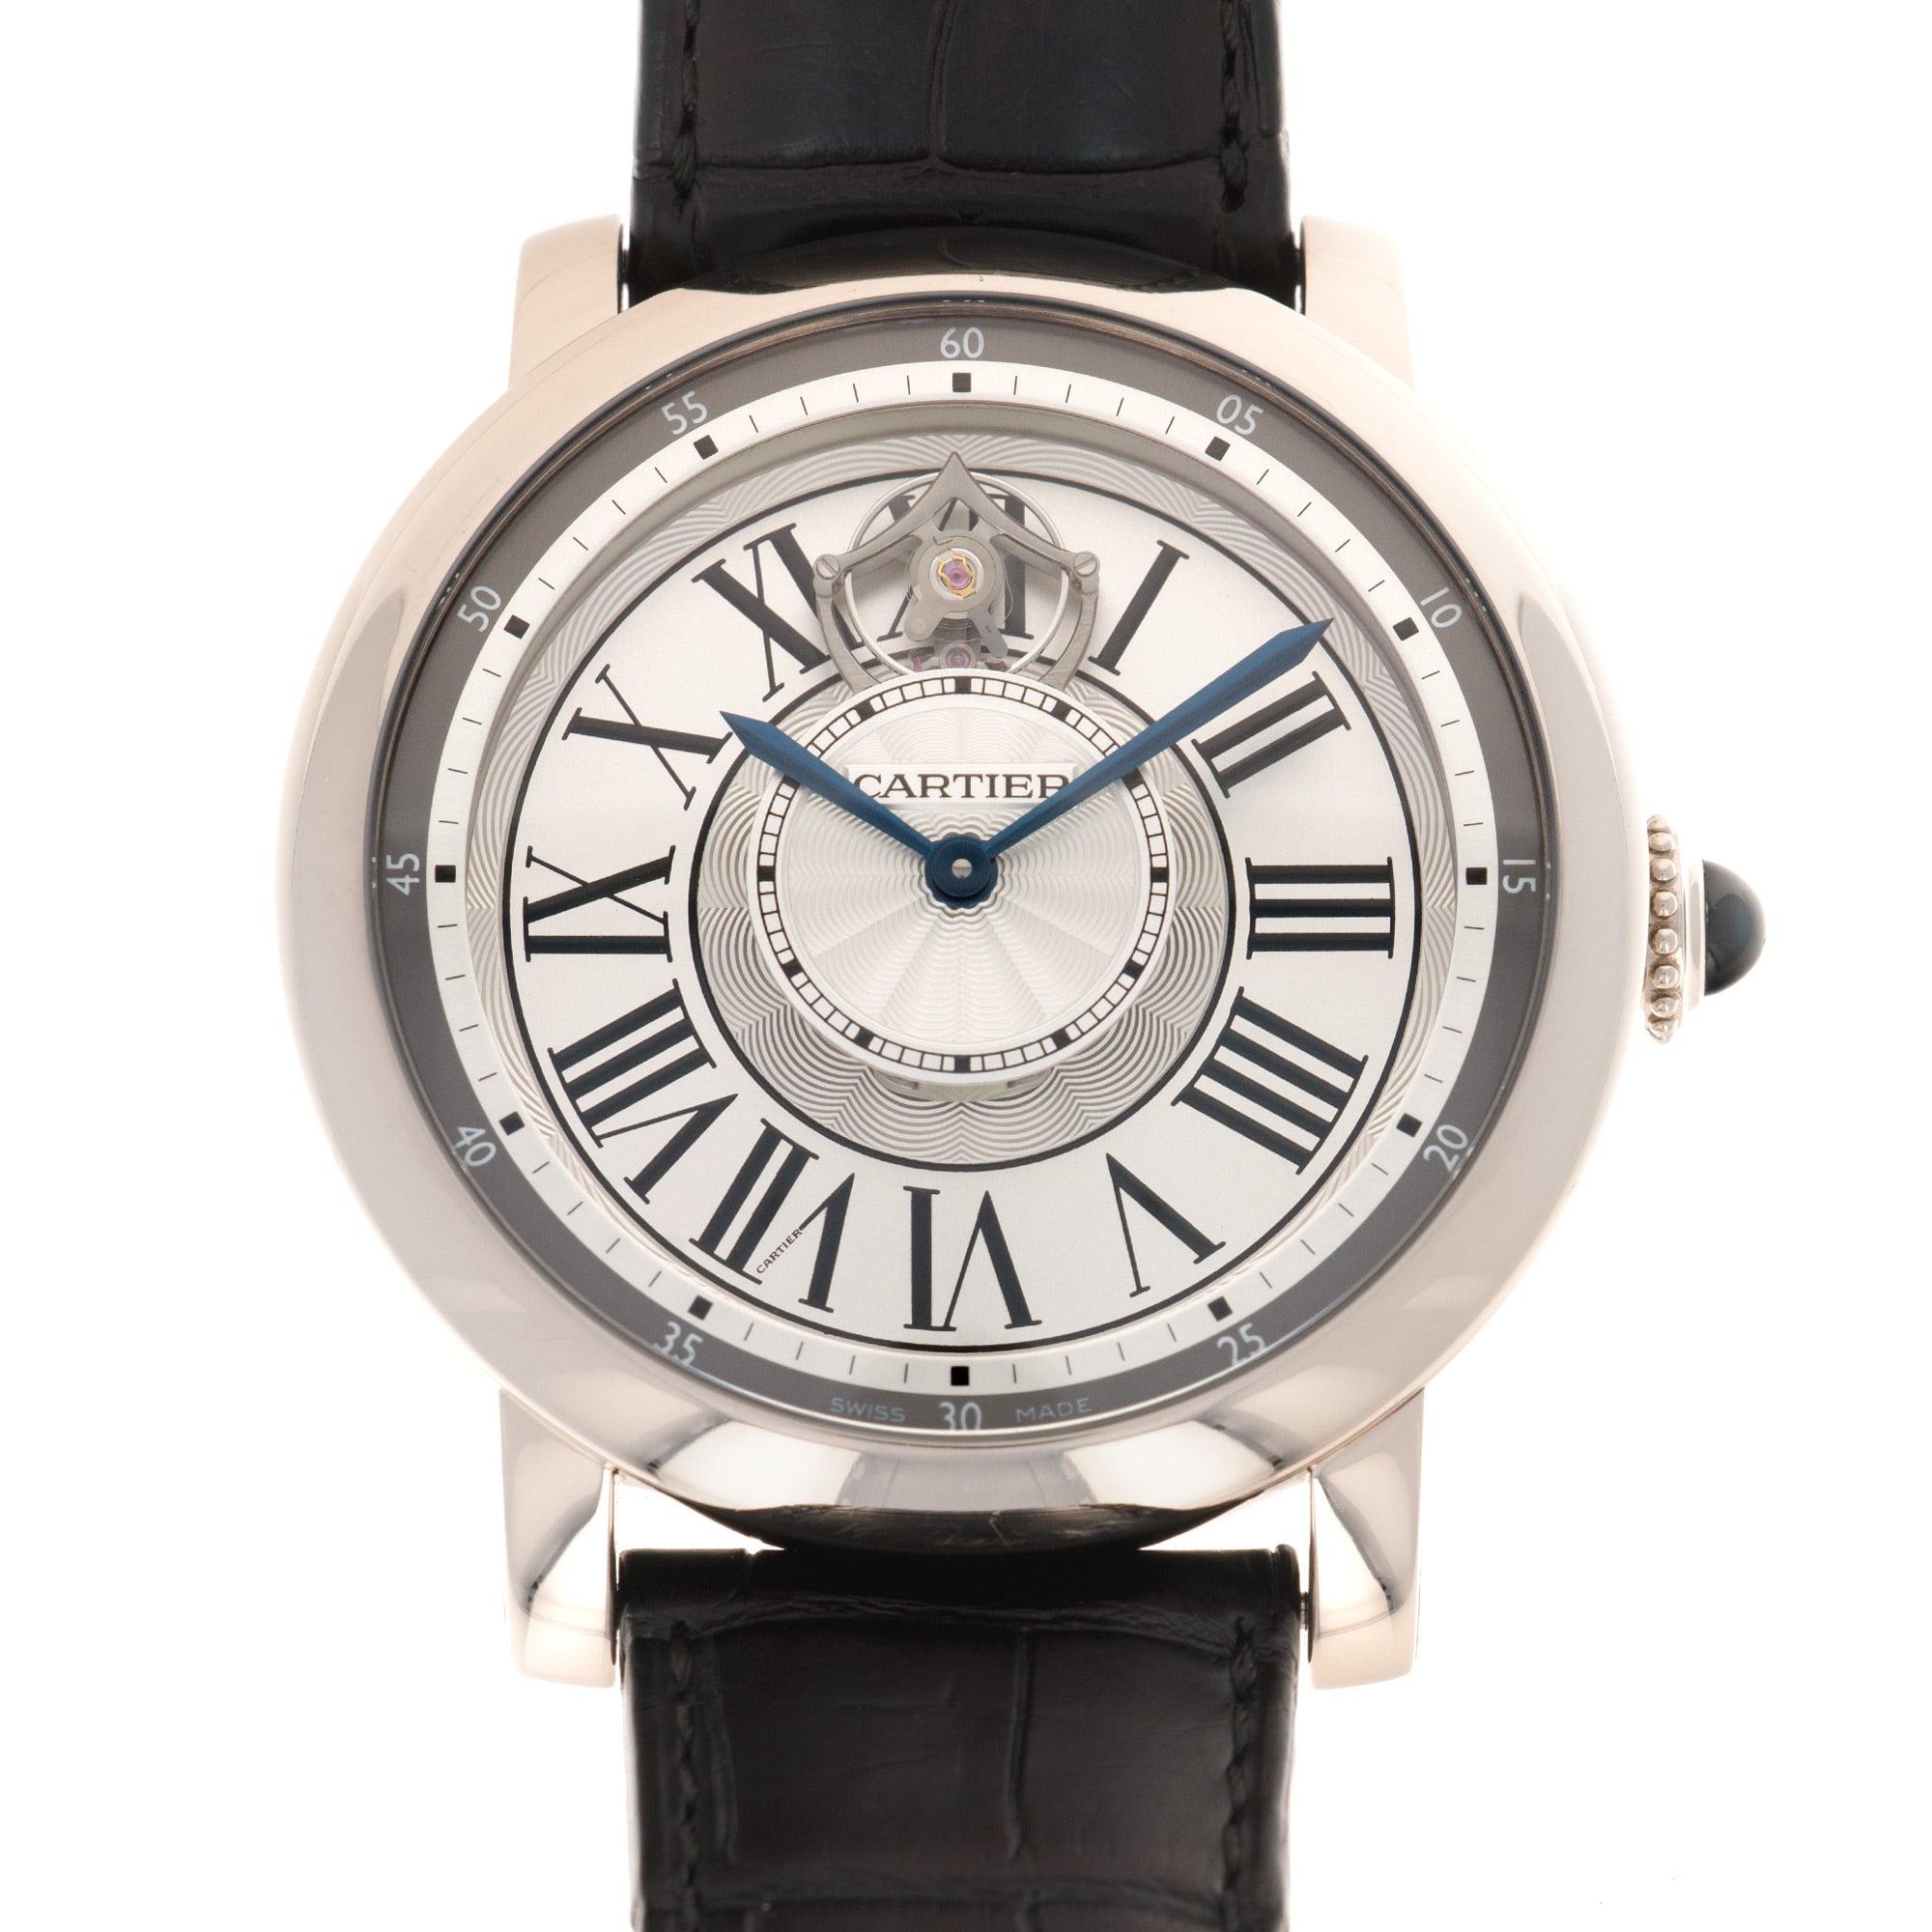 Cartier - Cartier White Gold Rotonde Astrotourbillon Watch Ref. W1556204 - The Keystone Watches